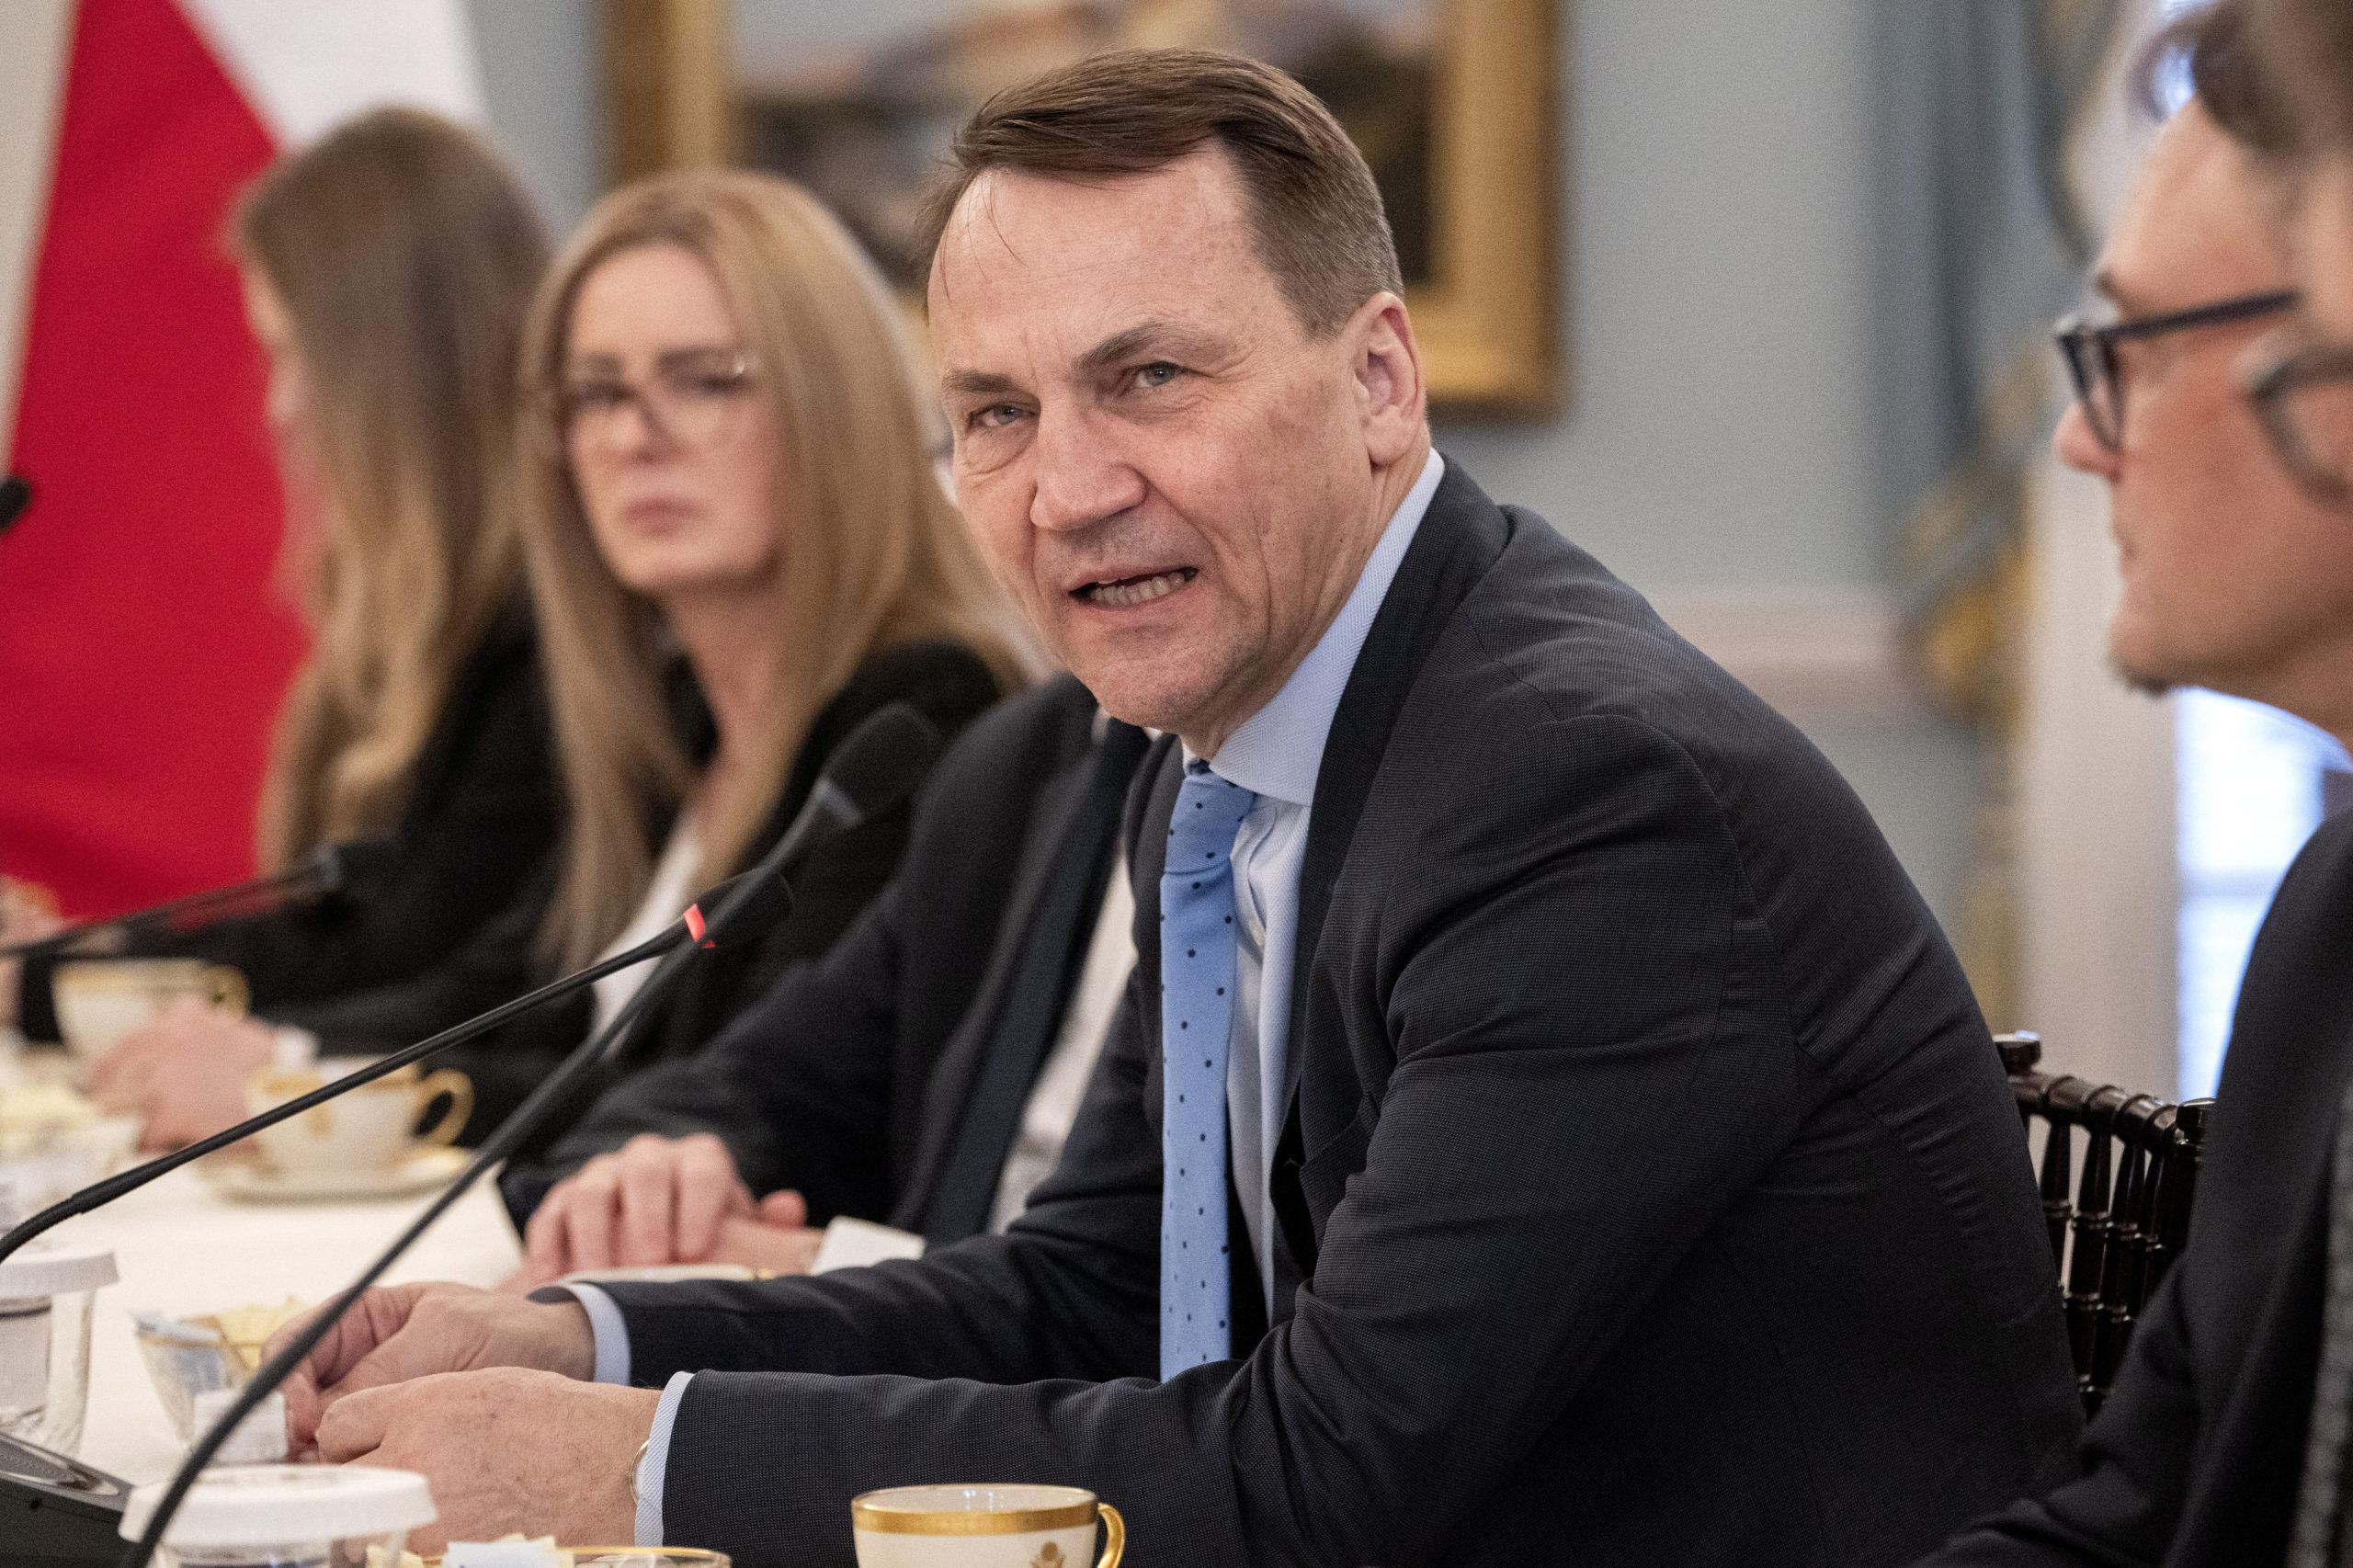 Polish Foreign Minister Radek Sikorski speaks while meeting with U.S. Secretary of State Antony Blinken, not pictured, on Feb. 26 at the State Department in Washington, D.C.